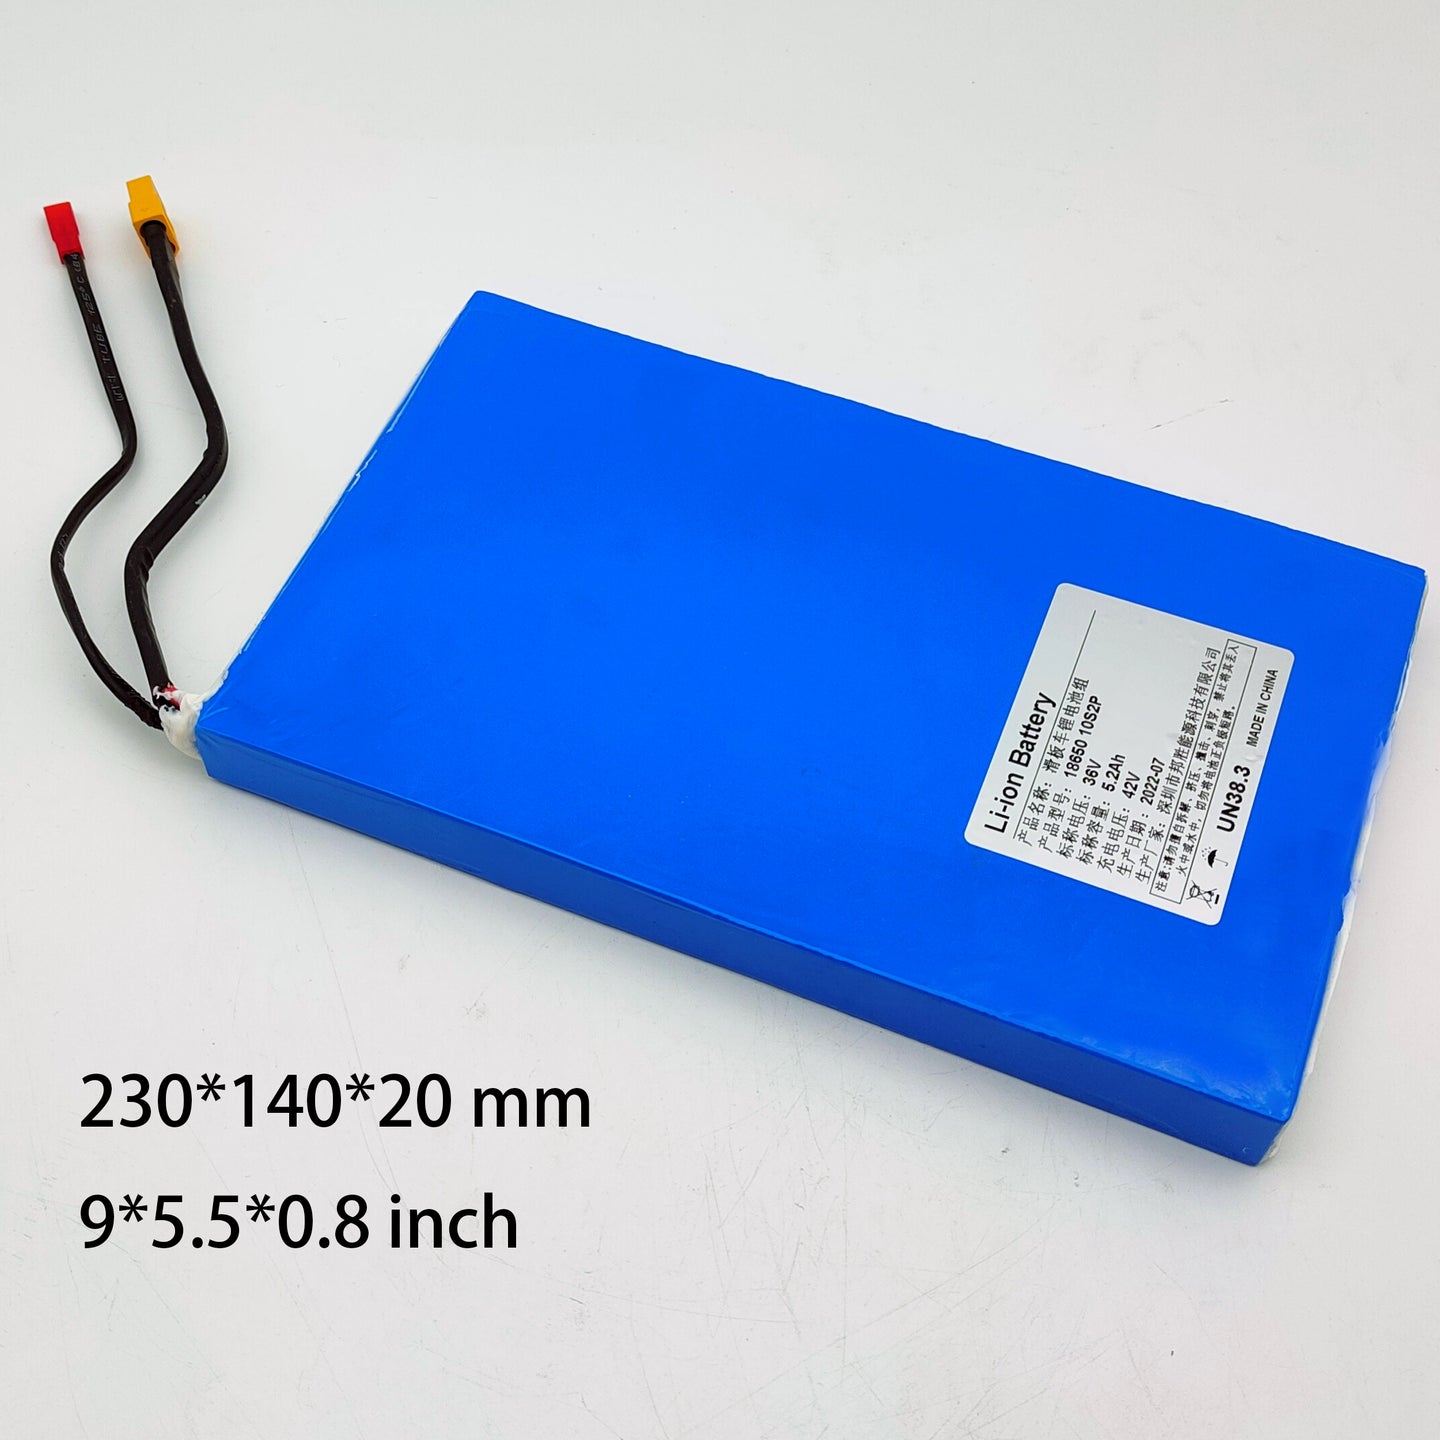 size of Premium 36V 10S Lithium-ion Battery Pack for Electric Skateboard - Powerful and reliable energy source, designed for optimal performance and extended riding range. Everything is plug and play, no soldering is required,These batteries are lithium-ion batteries made from Chinese/LG/Samsung cells with a modular BMS (Battery Management System) that protects the battery pack and keeps it running safely when operating and charging.